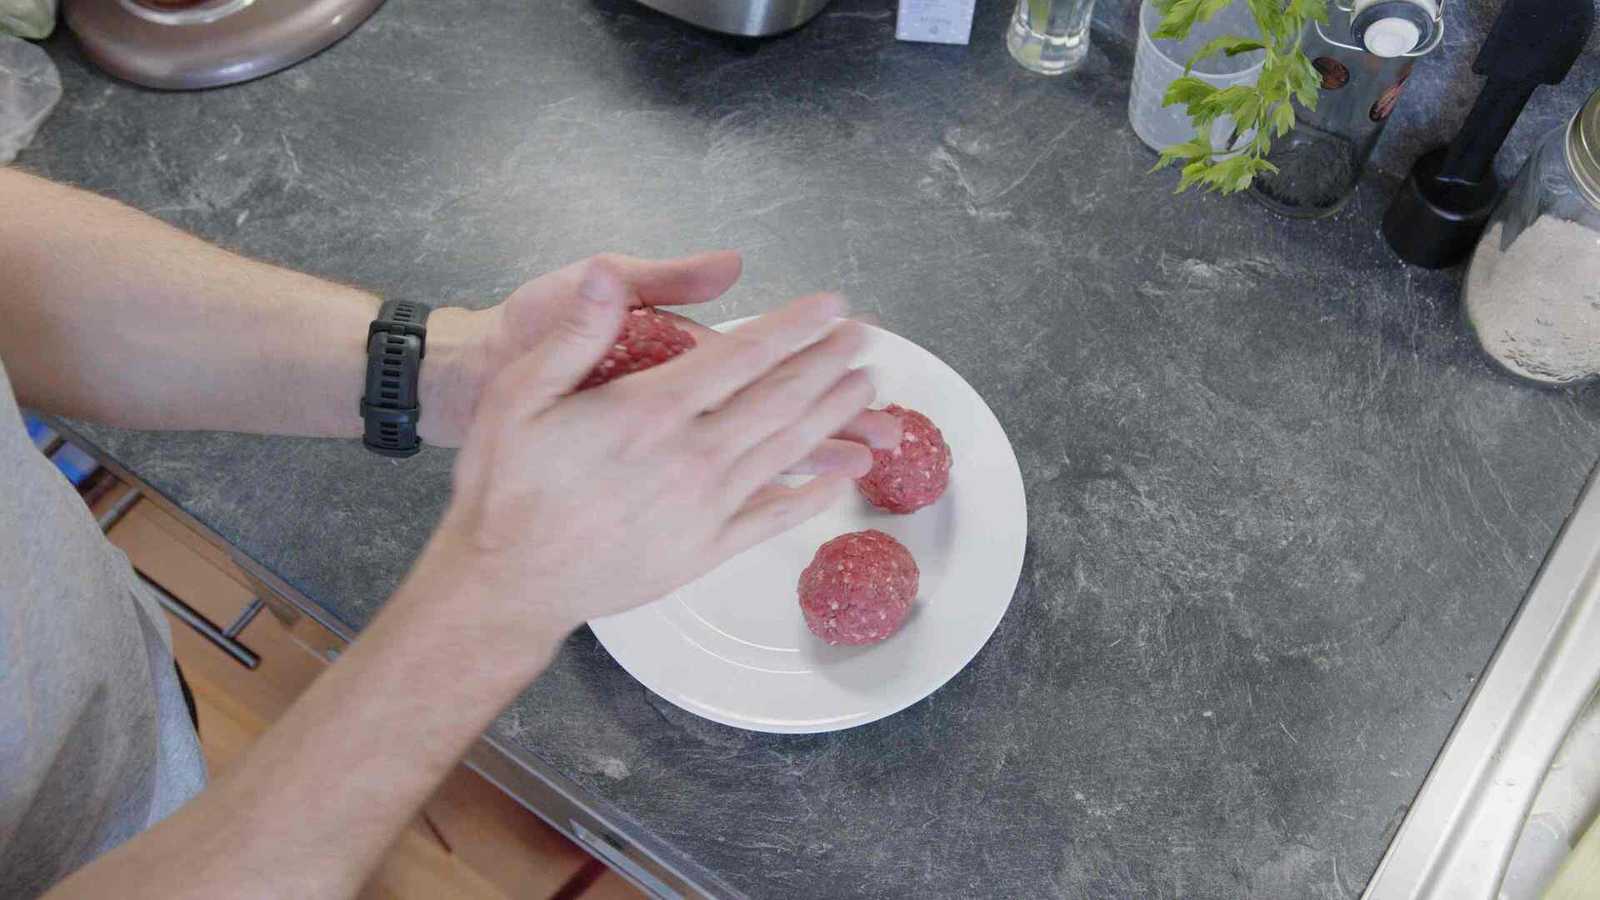 Flattening meat between hands to a thin patty